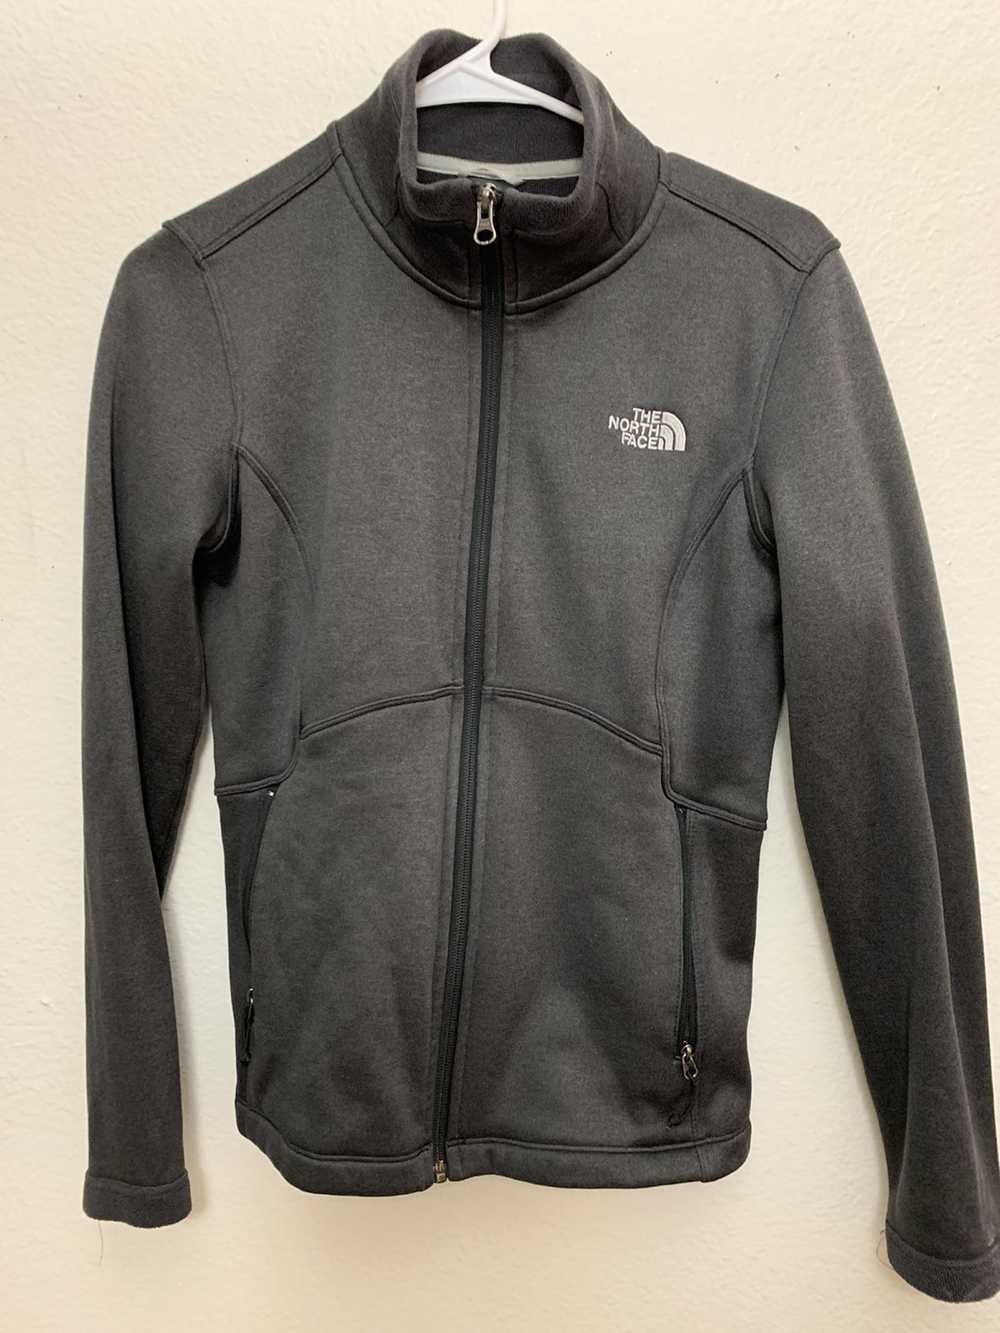 The North Face The North Face jacket - image 1